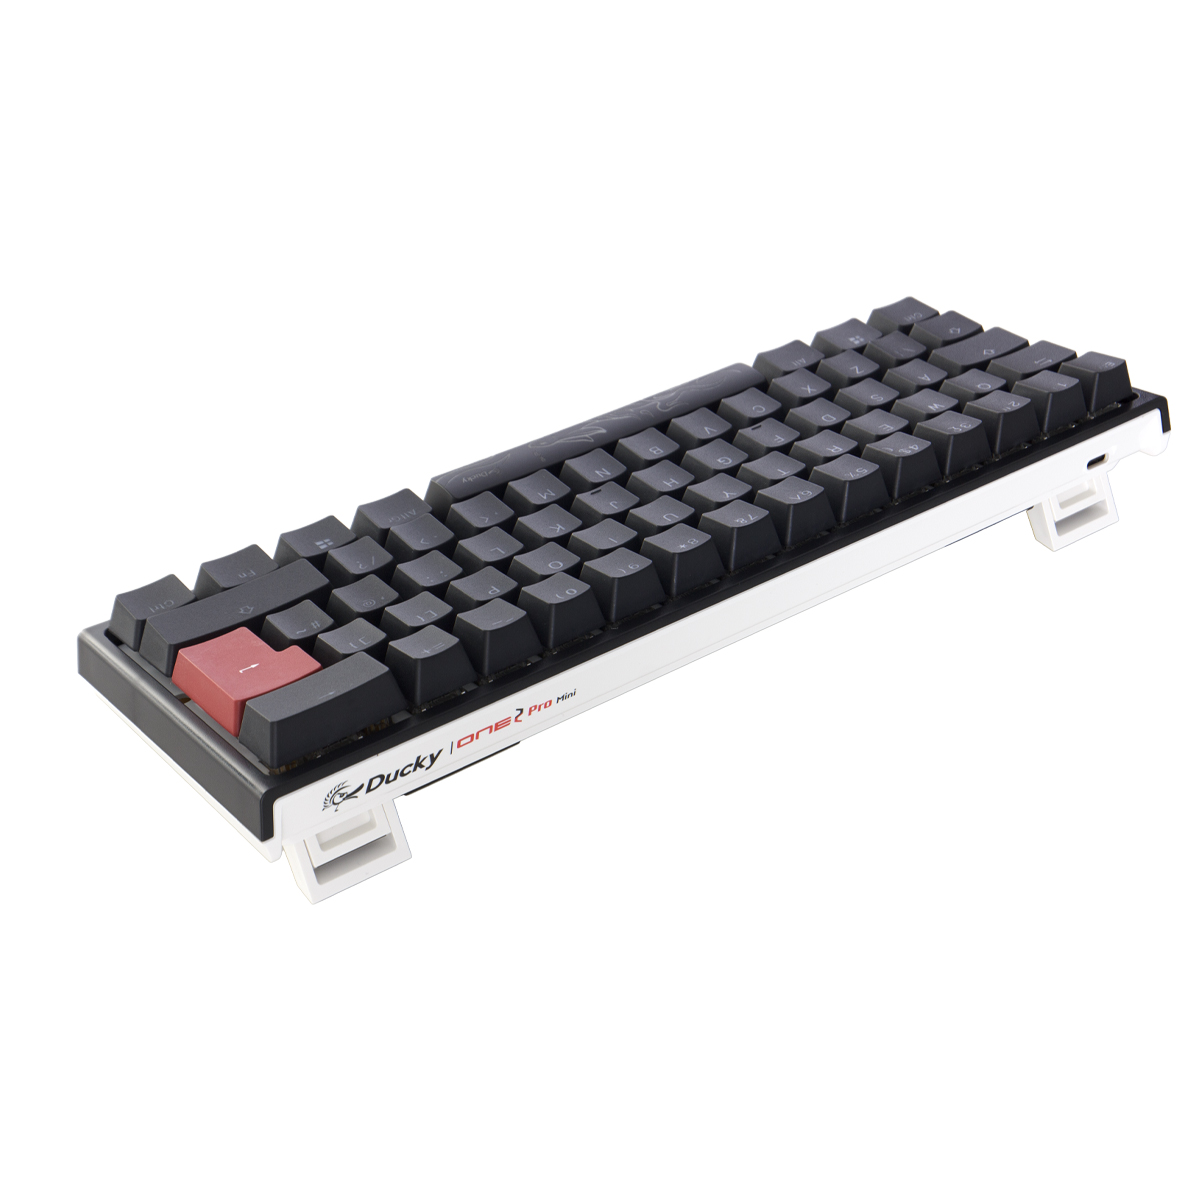 Ducky - Ducky One 2 Pro Mini 60% Mechanical Gaming Keyboard Black MX Cherry Red Switch - UK Layout